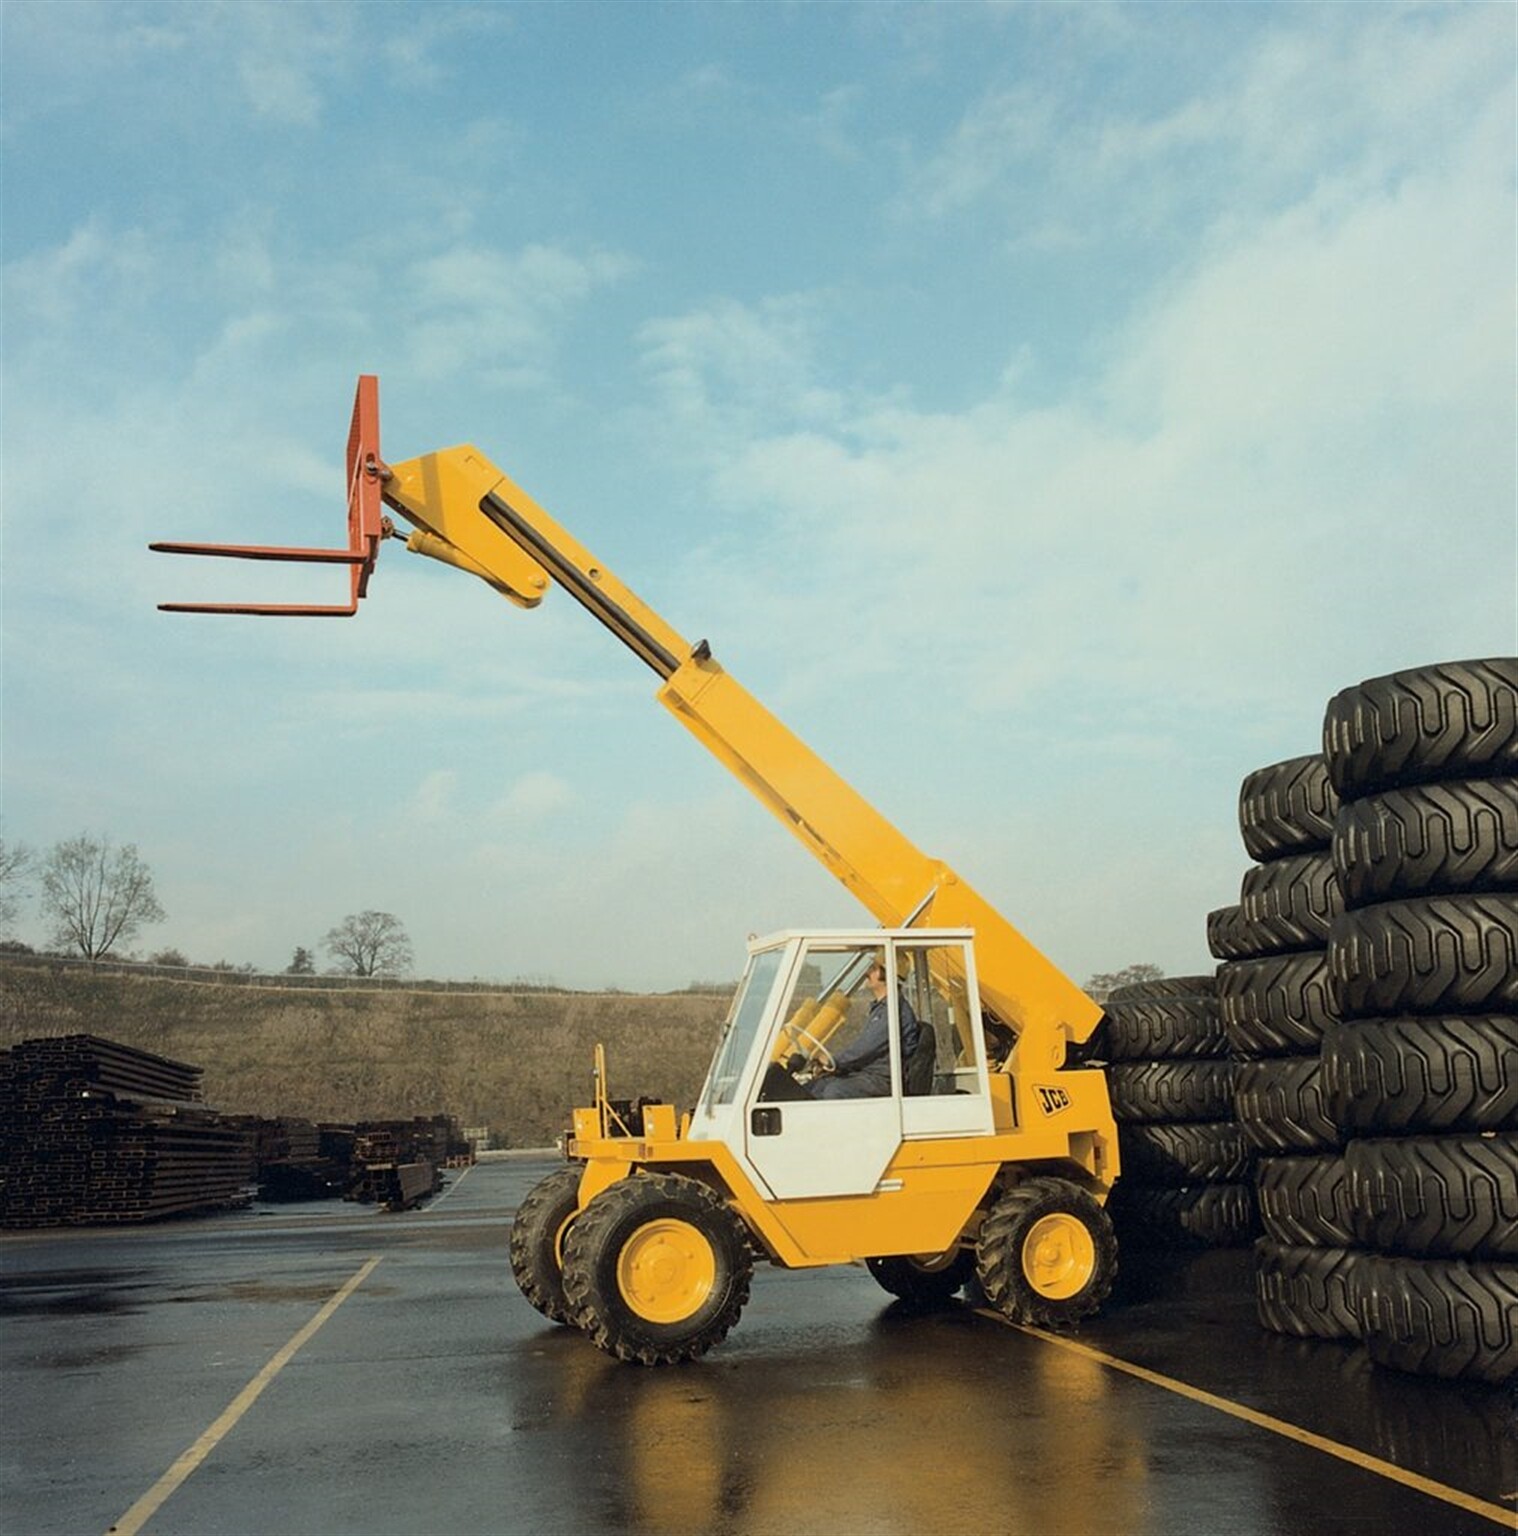 40 years of JCB Loadall production celebrated